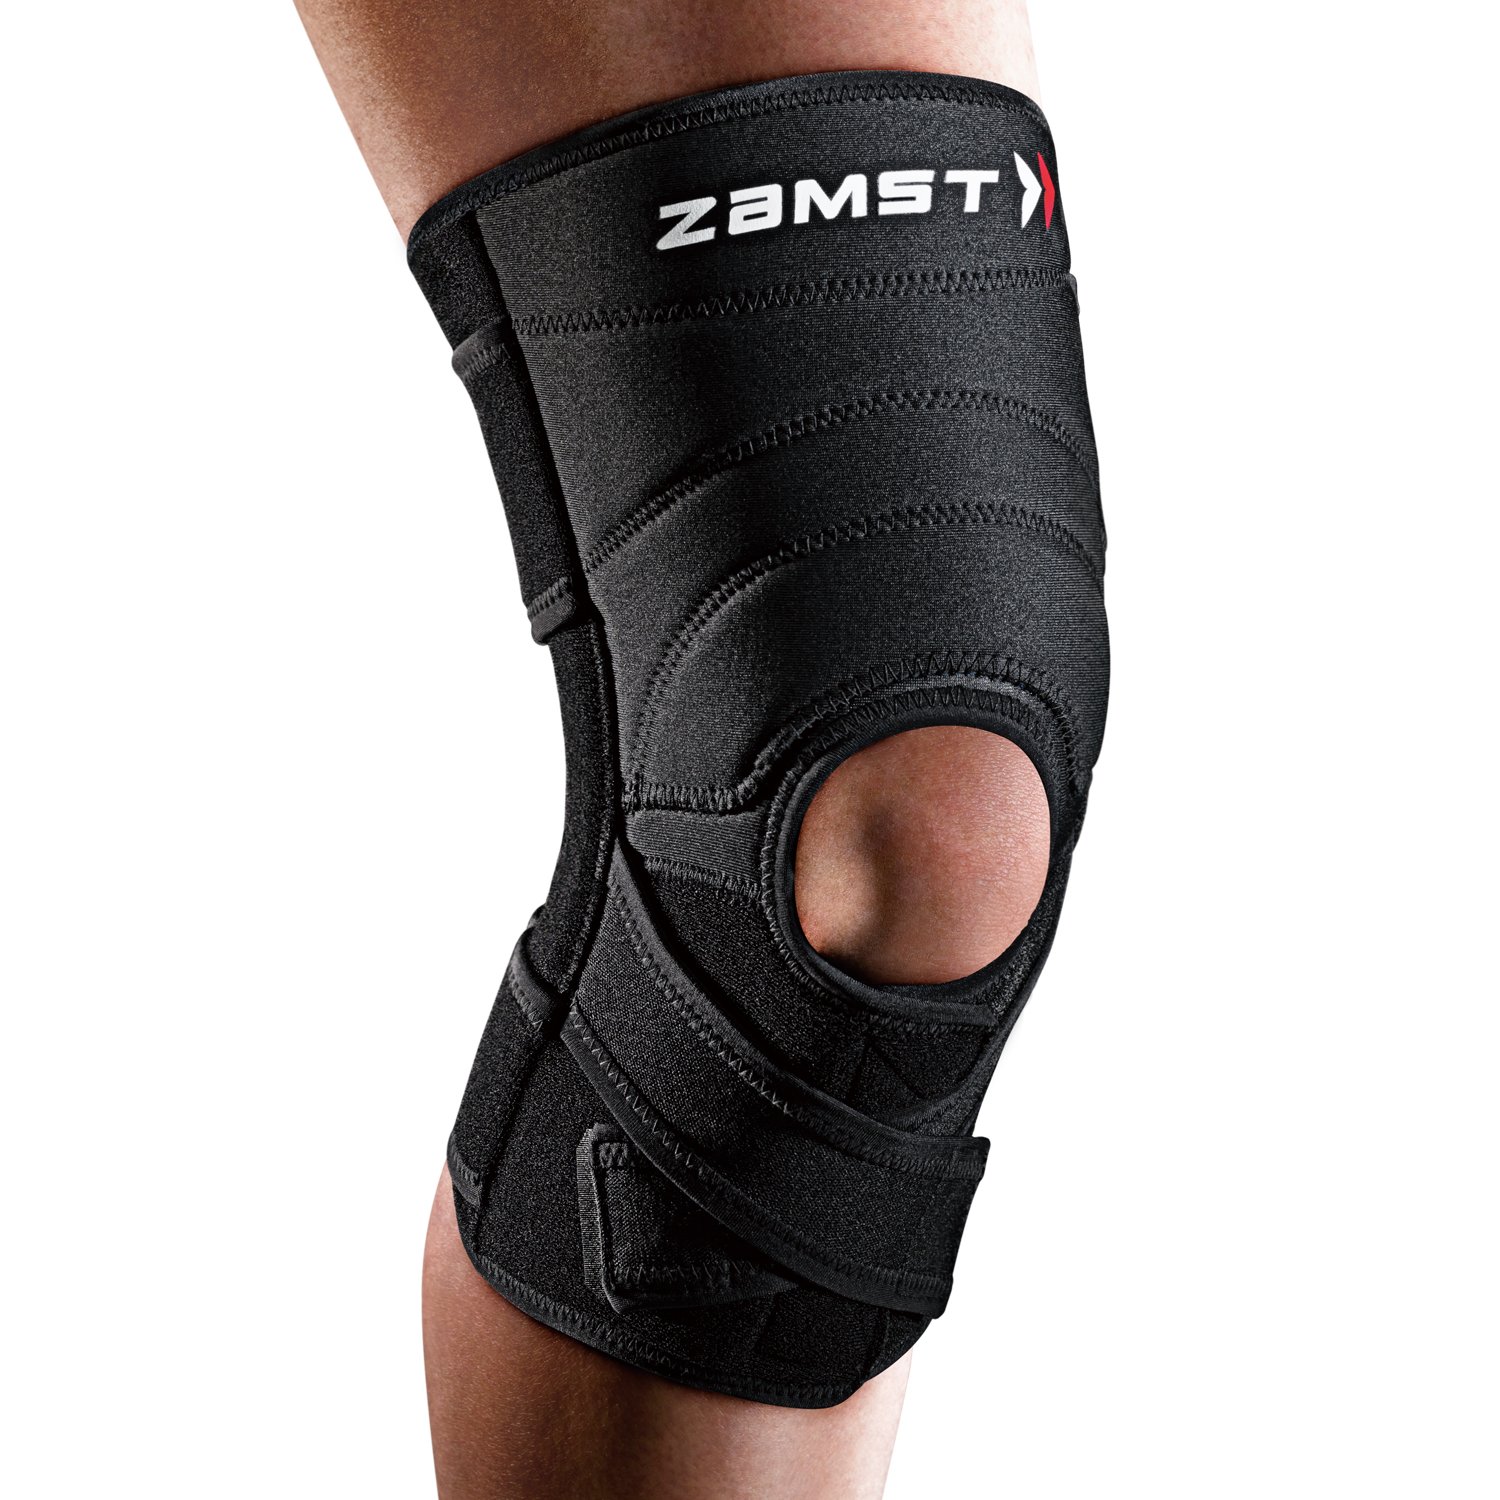 Zamst ZK-7 Sports Knee Brace For Moderate Sprains Of the ACL MCL LCL - Medium